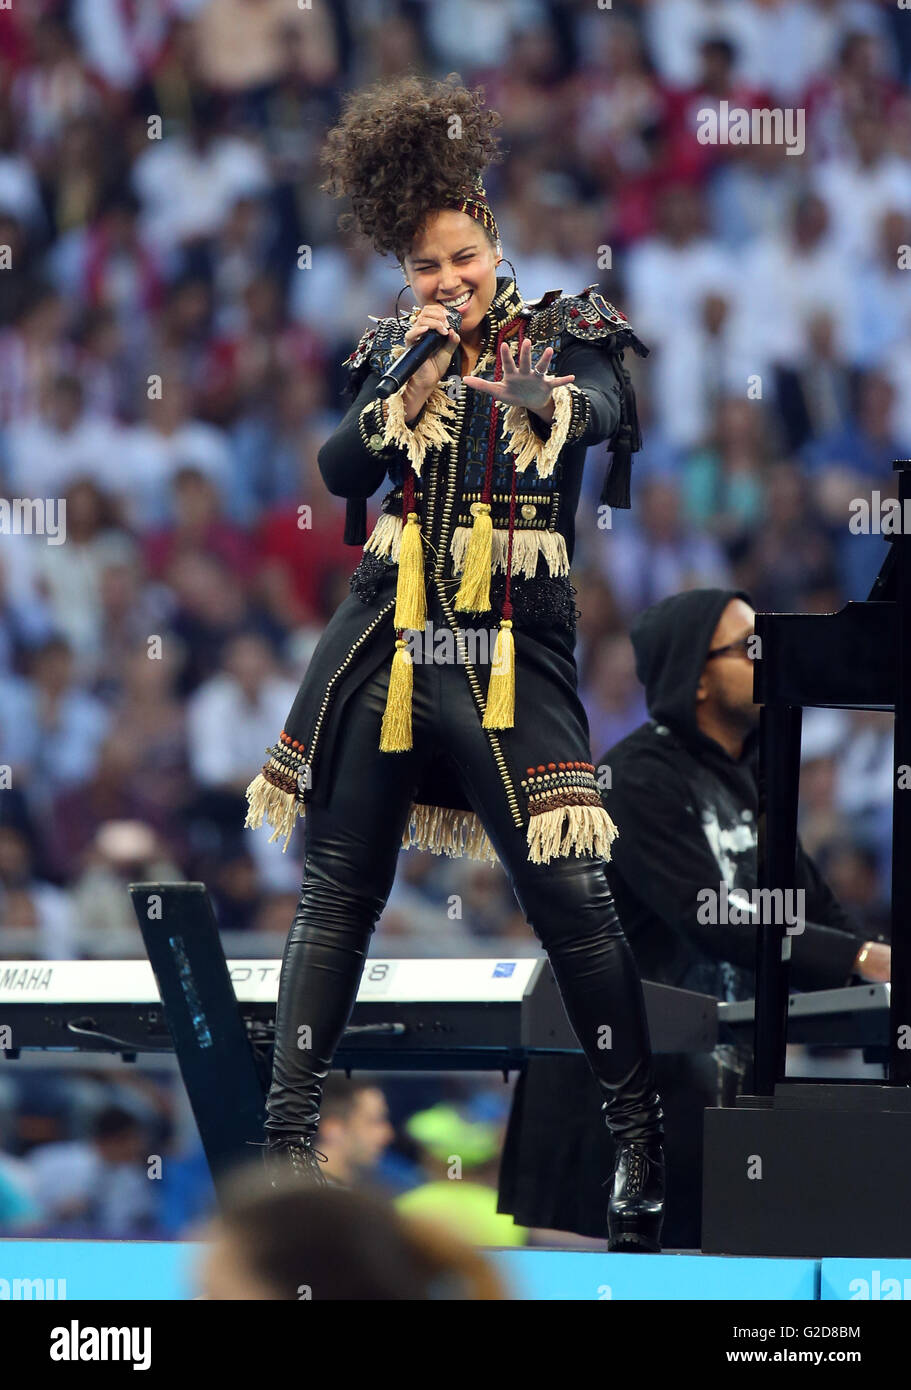 Milan, Italy. 28th May, 2016. UEFA Champions League Final between Real Madrid and Atletico de Madrid at the San Siro stadium in Milan, Italy. Alicia Keys during her performance before the match © Action Plus Sports/Alamy Live News Stock Photo